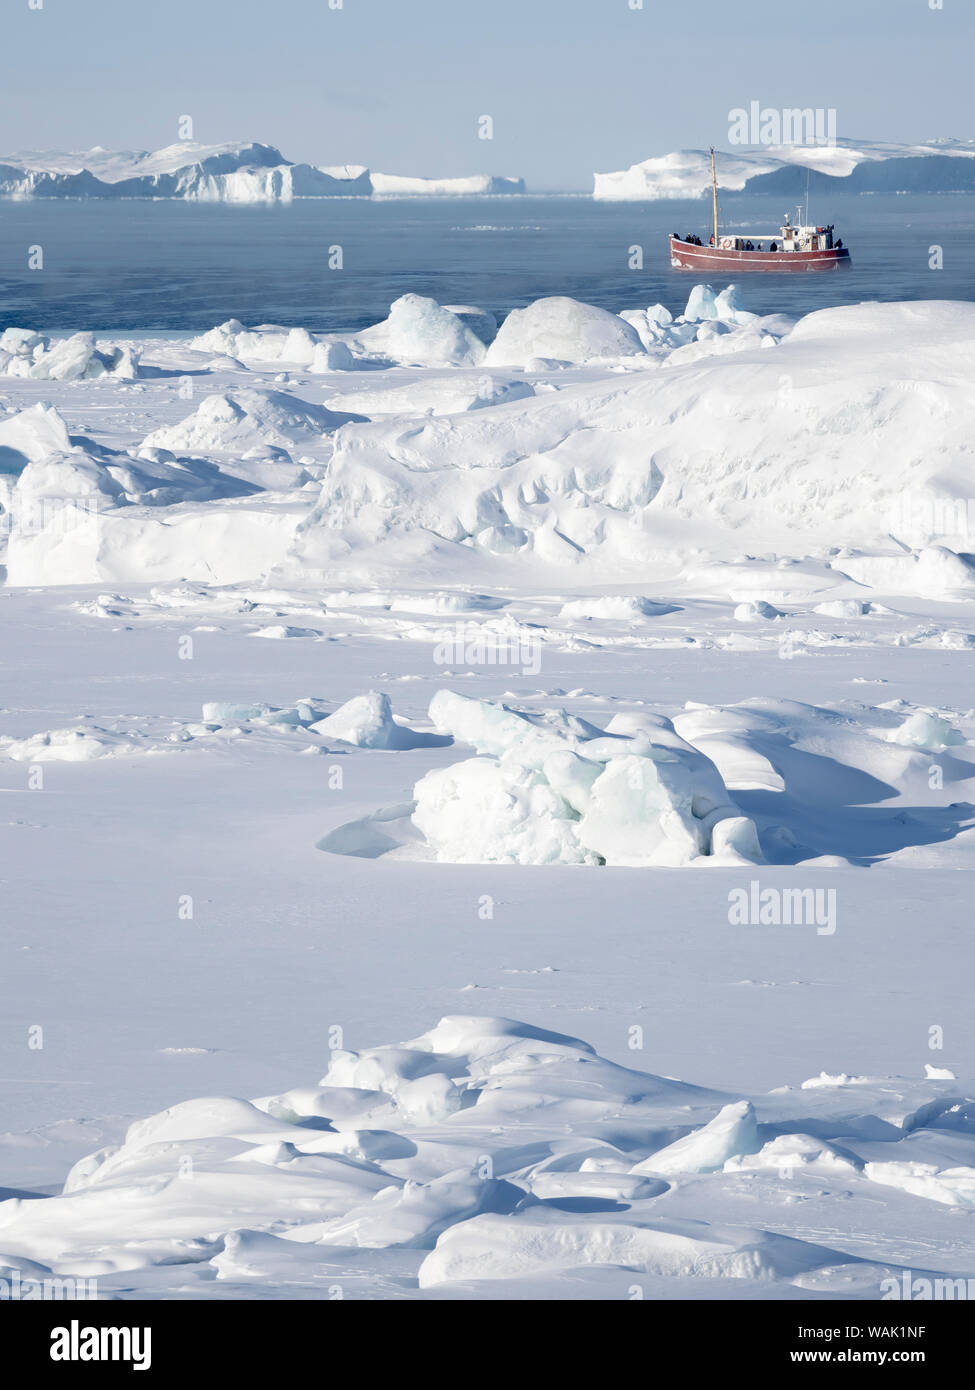 Boat on frozen Disko Bay with icebergs at the Ilulissat Icefjord, listed as UNESCO World Heritage Site. Greenland. (Editorial Use Only) Stock Photo